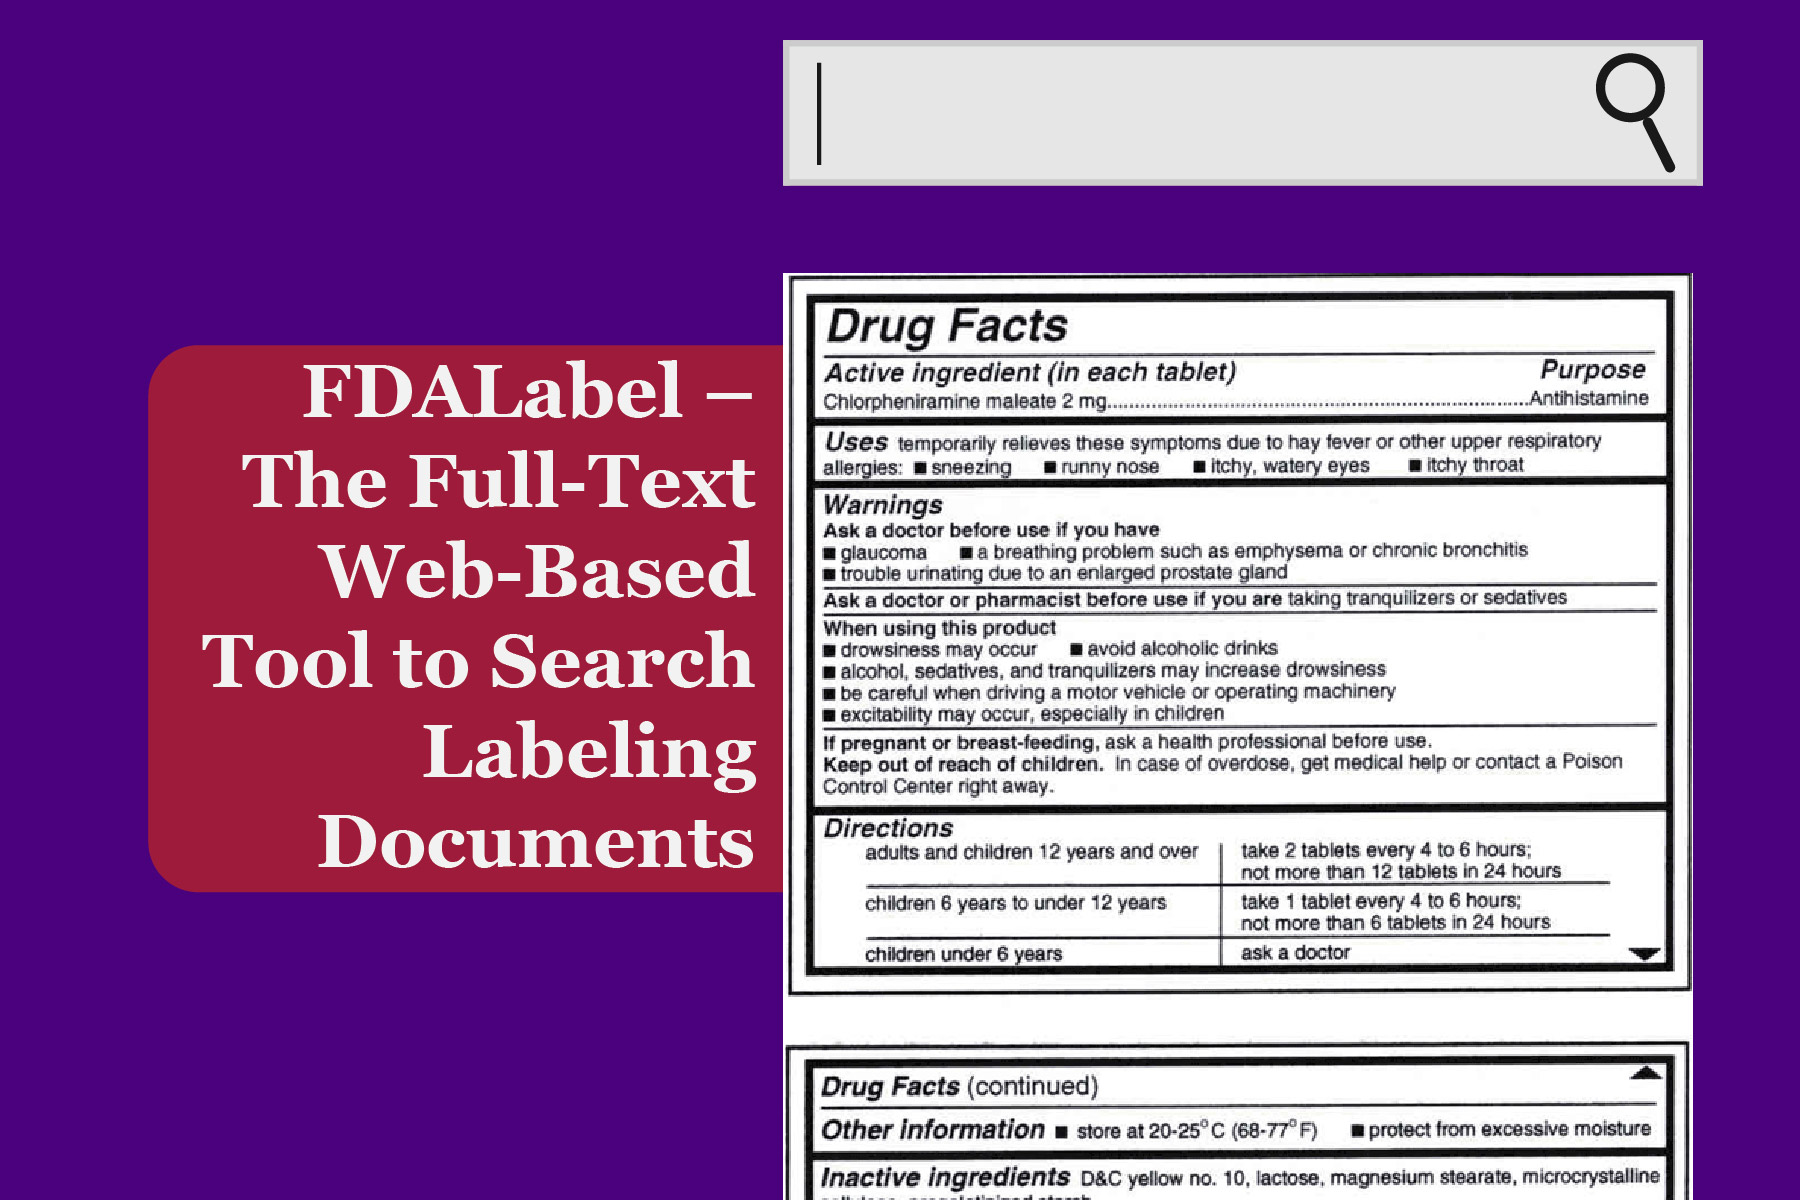 FDALabel – The Full-Text Web-Based Tool to Search Labelling Documents